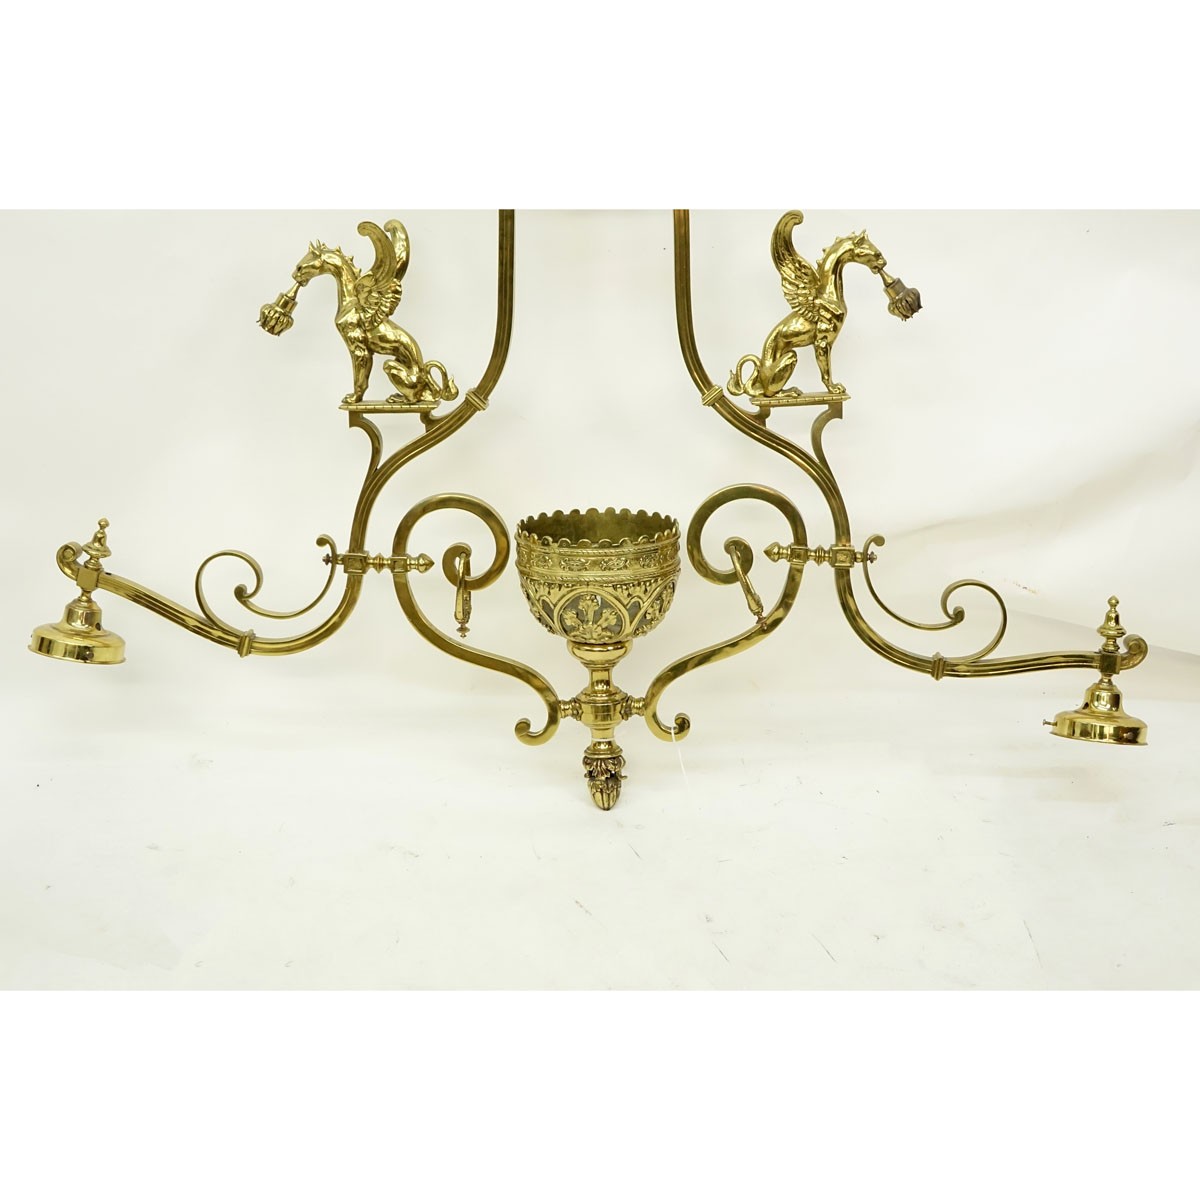 Large Gothic Style Gilt Bronze Two Arm Billiard Light Fixture with Amber Color Glass Shades. Good condition.